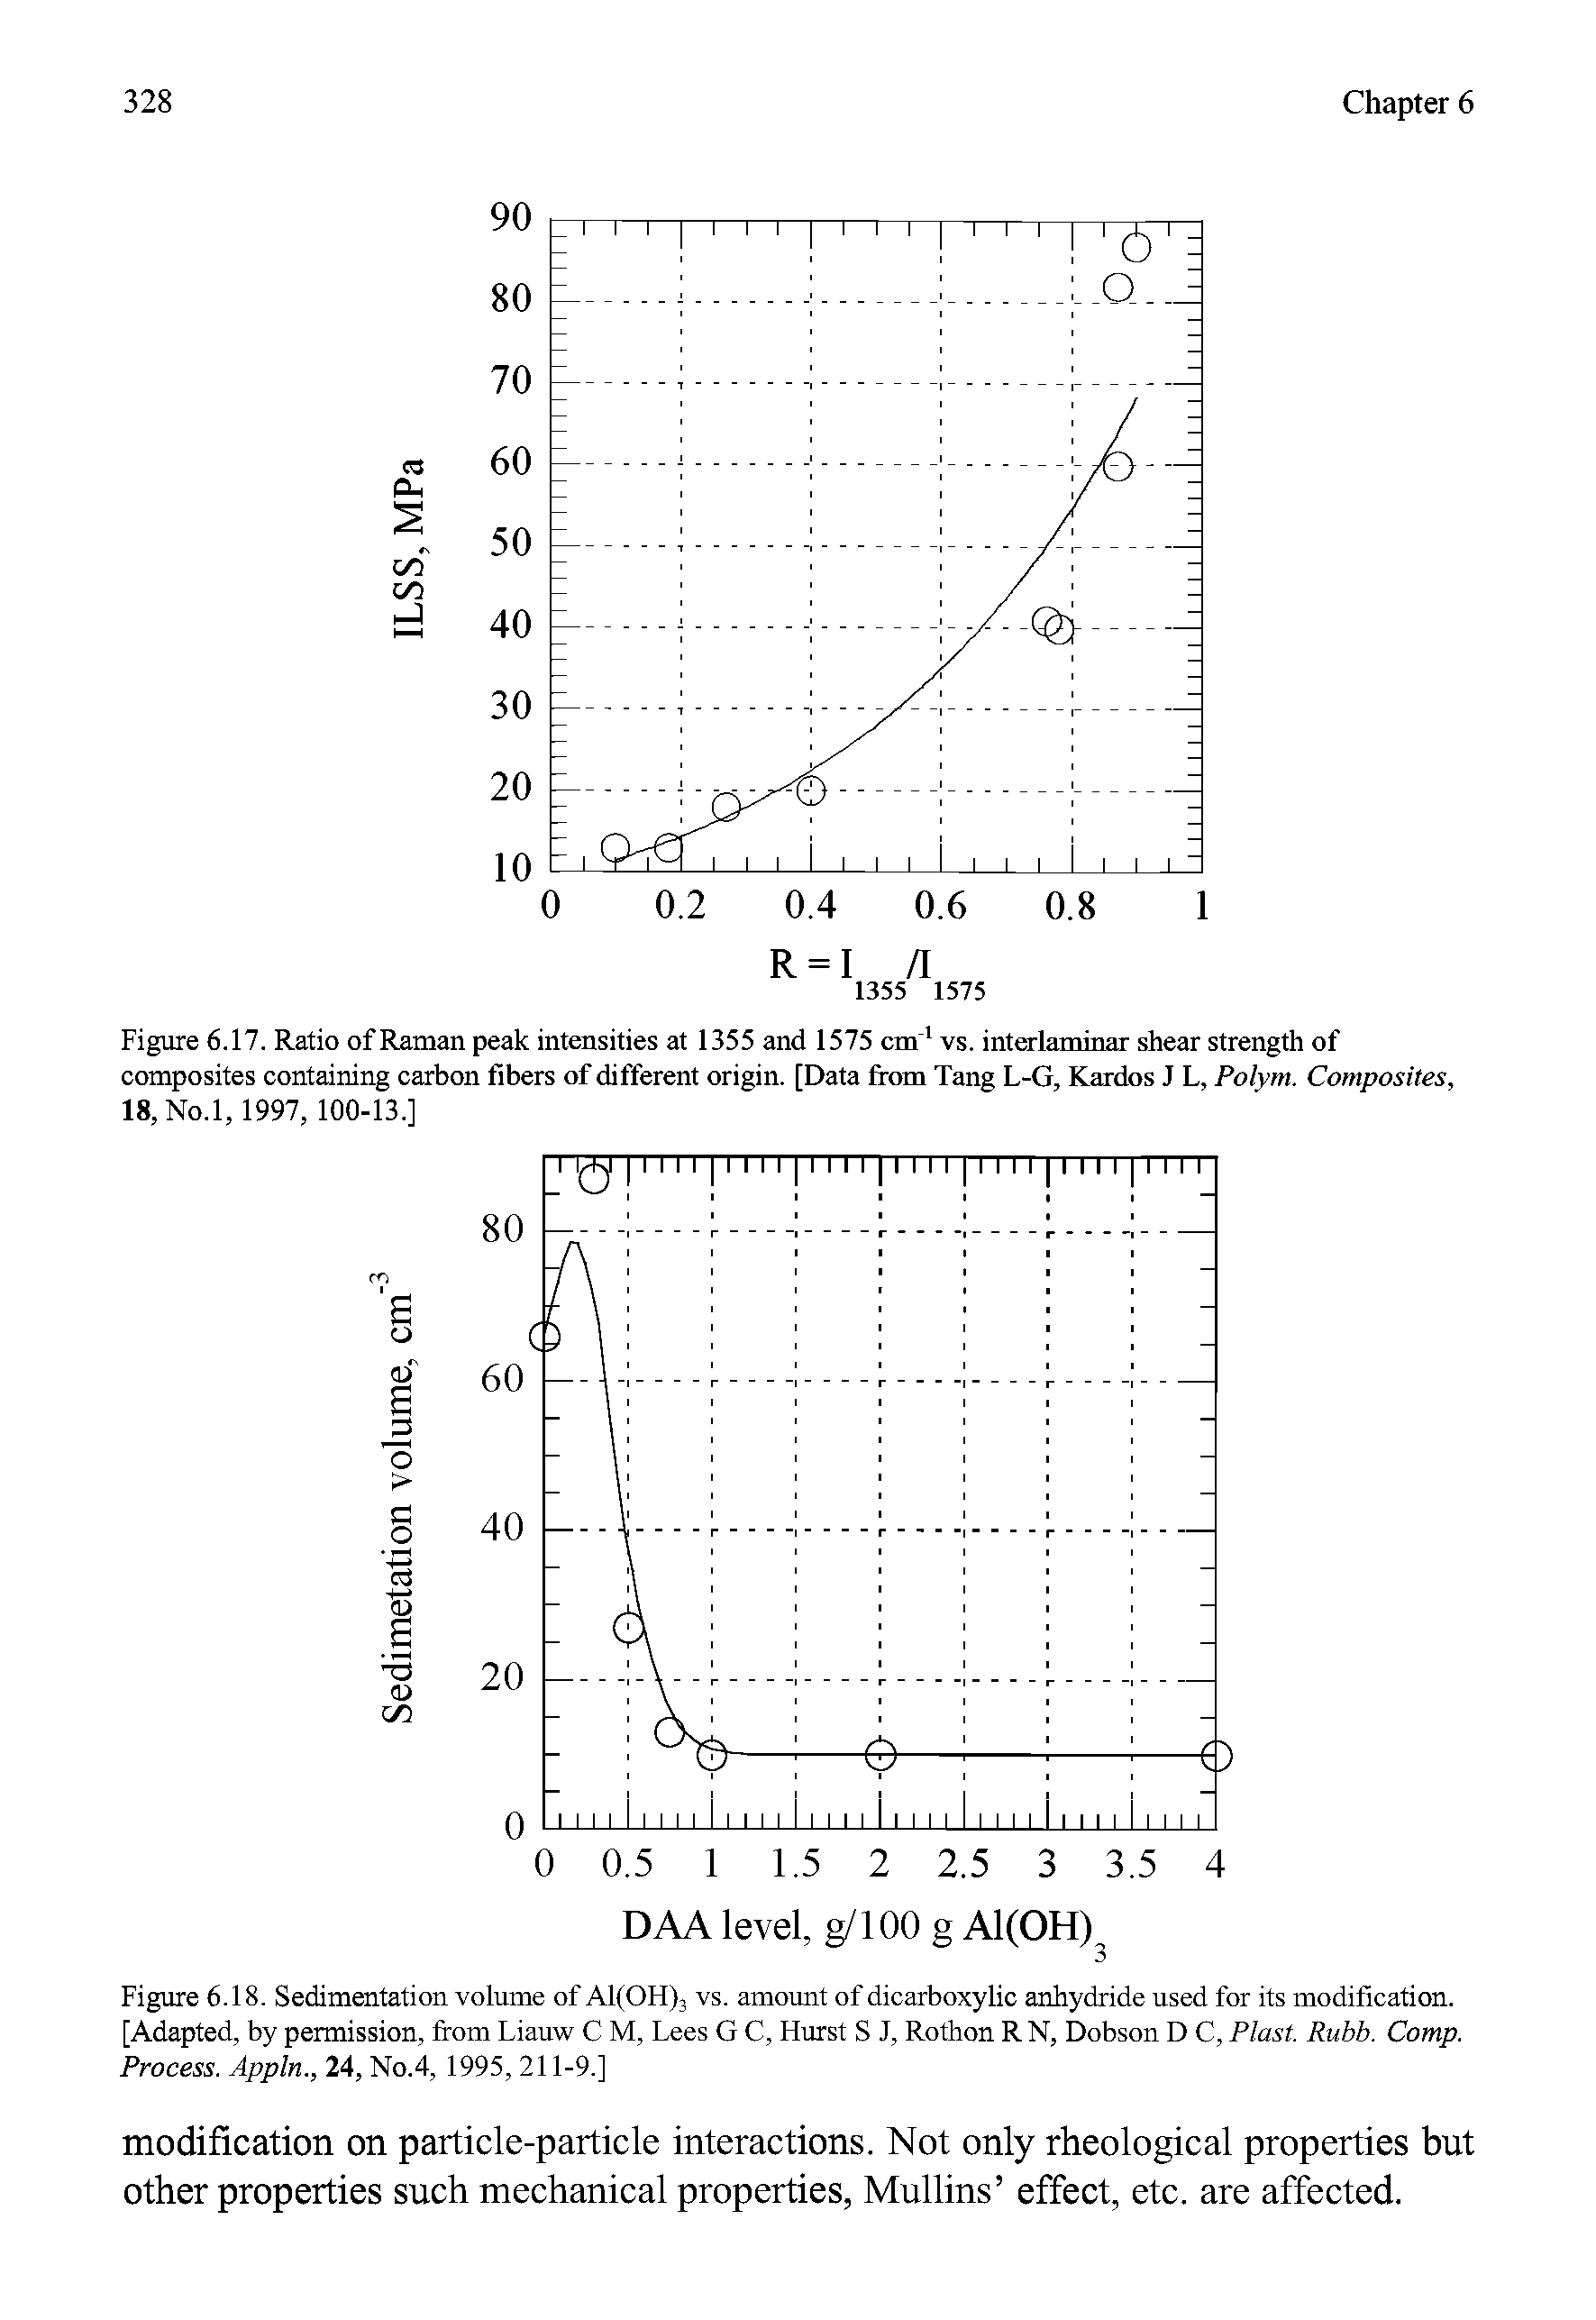 Figure 6.17. Ratio of Raman peak intensities at 1355 and 1575 cm vs. interlaminar shear strength of composites containing carbon fibers of different origin. [Data from Tang L-G, Kardos J L, Polym. Composites, 18,No.l, 1997, 100-13.]...